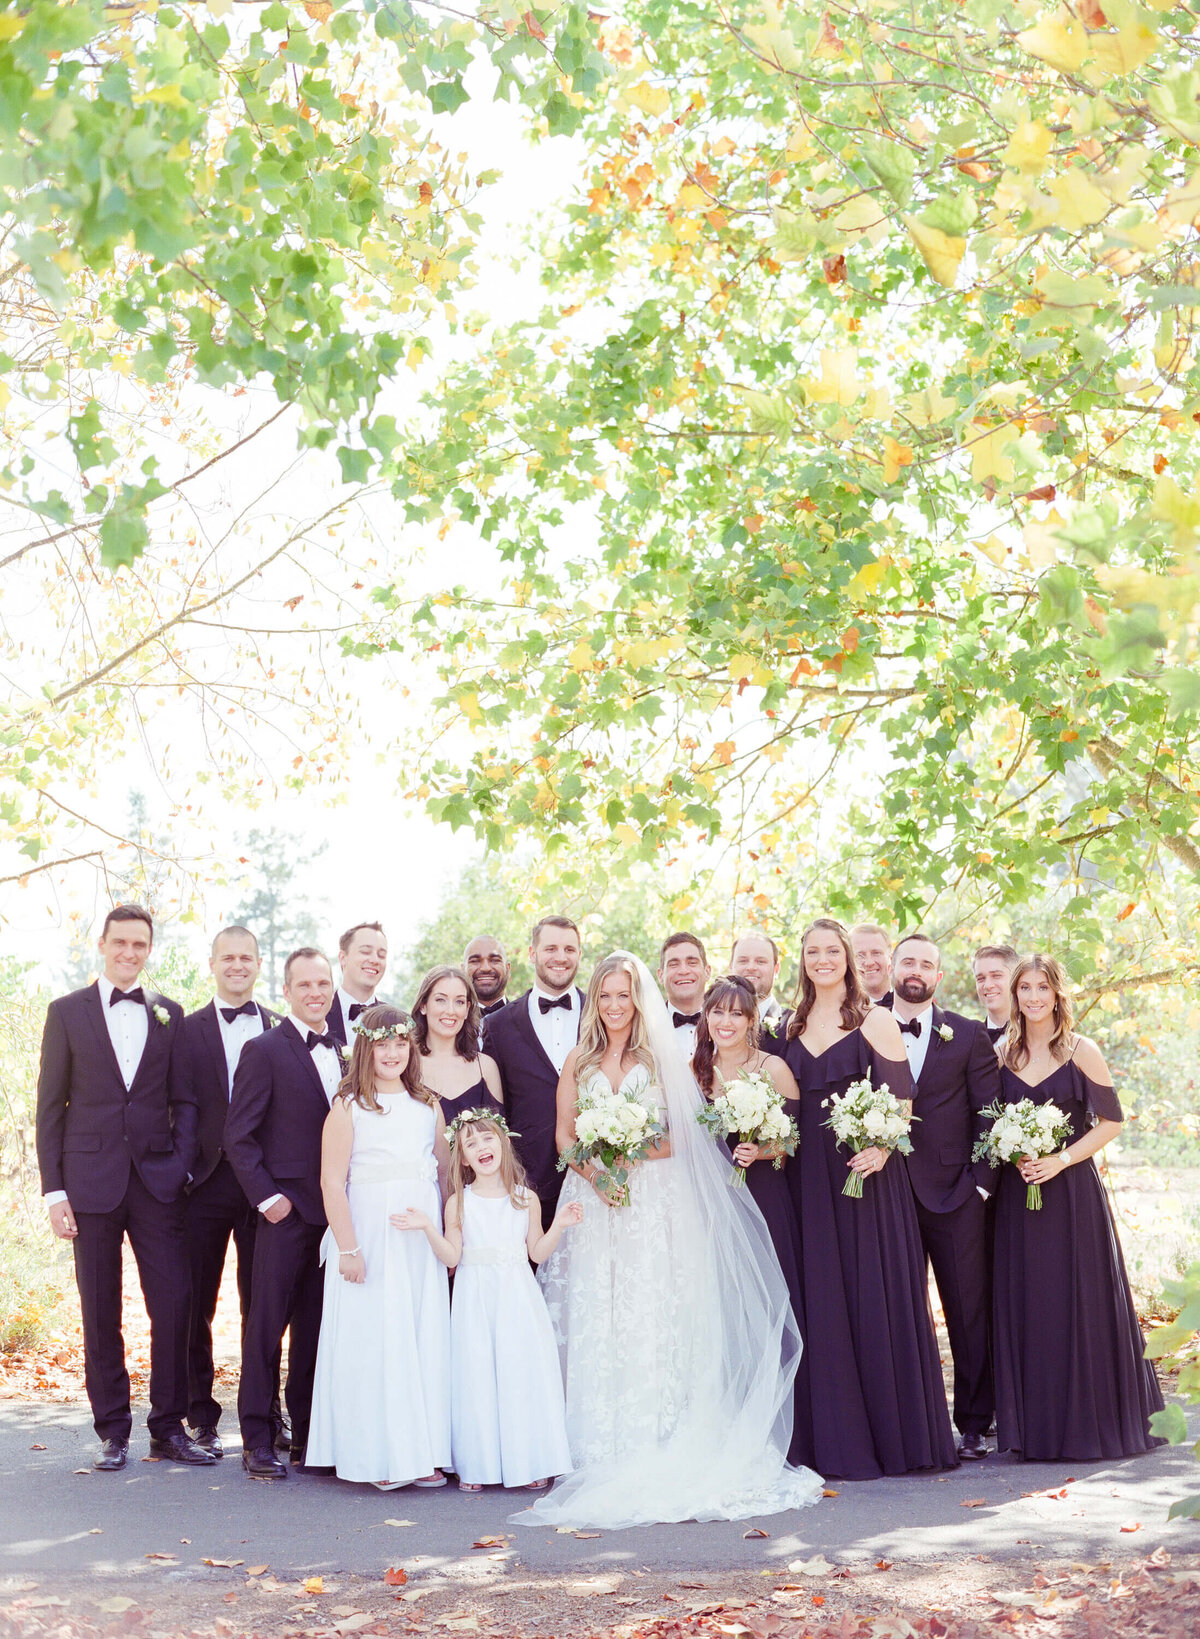 Finally, the groom, his best men, the bride, and her family come together to pose for wedding photographer Robin Jolin at a beautiful vineyard with pleasant light.